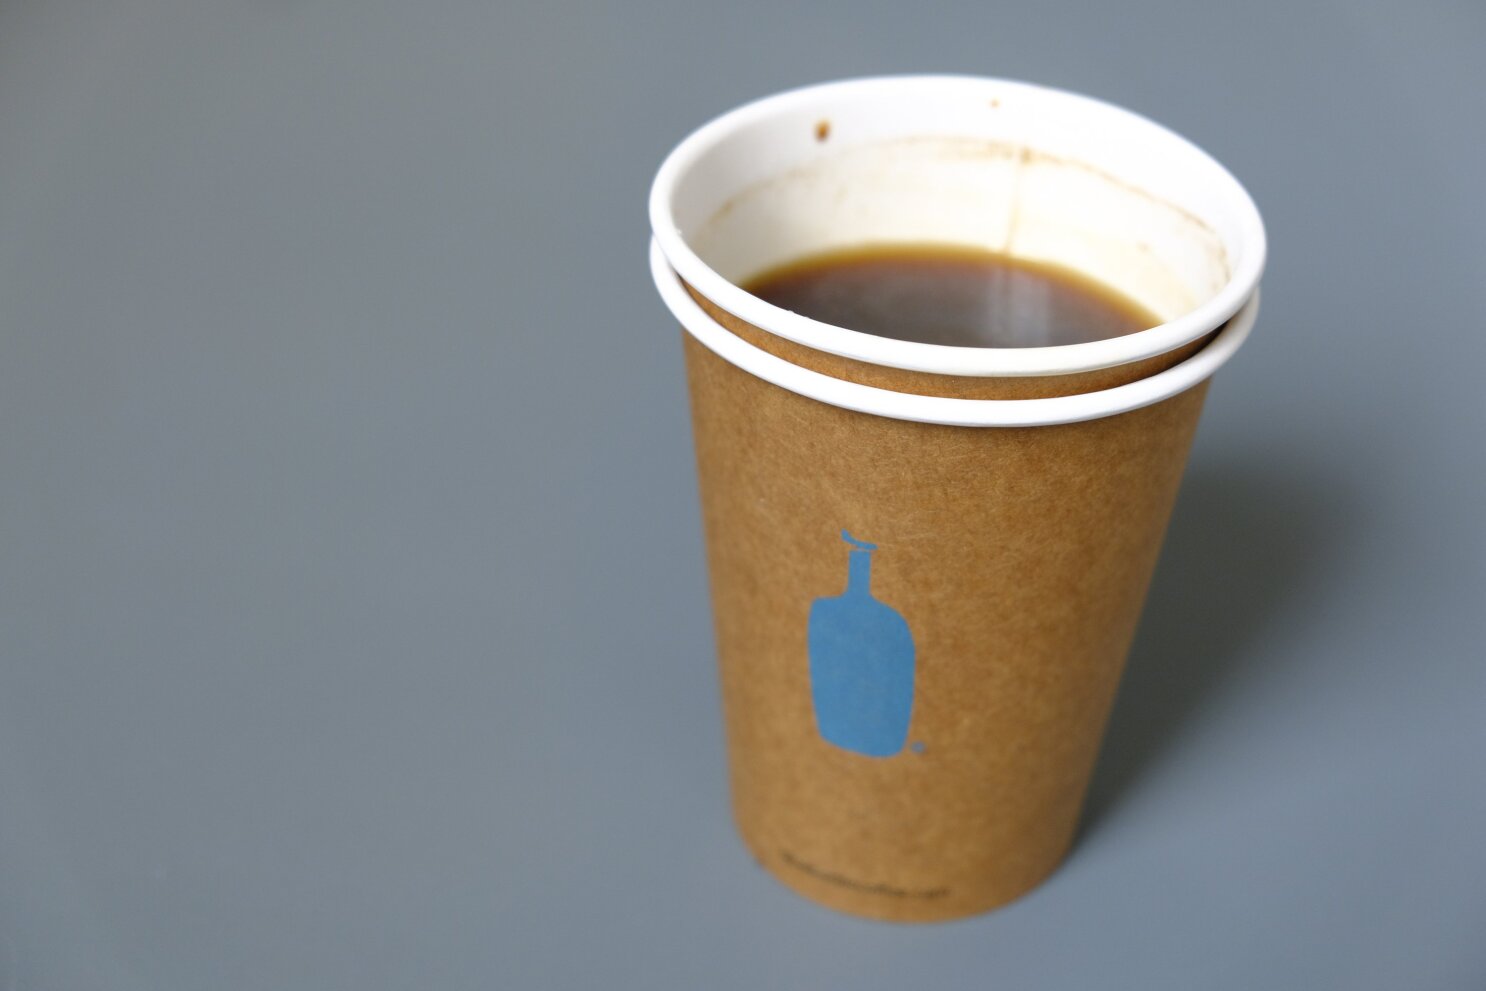 Starbucks Pledges $10 Million To Invent A Recyclable Coffee Cup